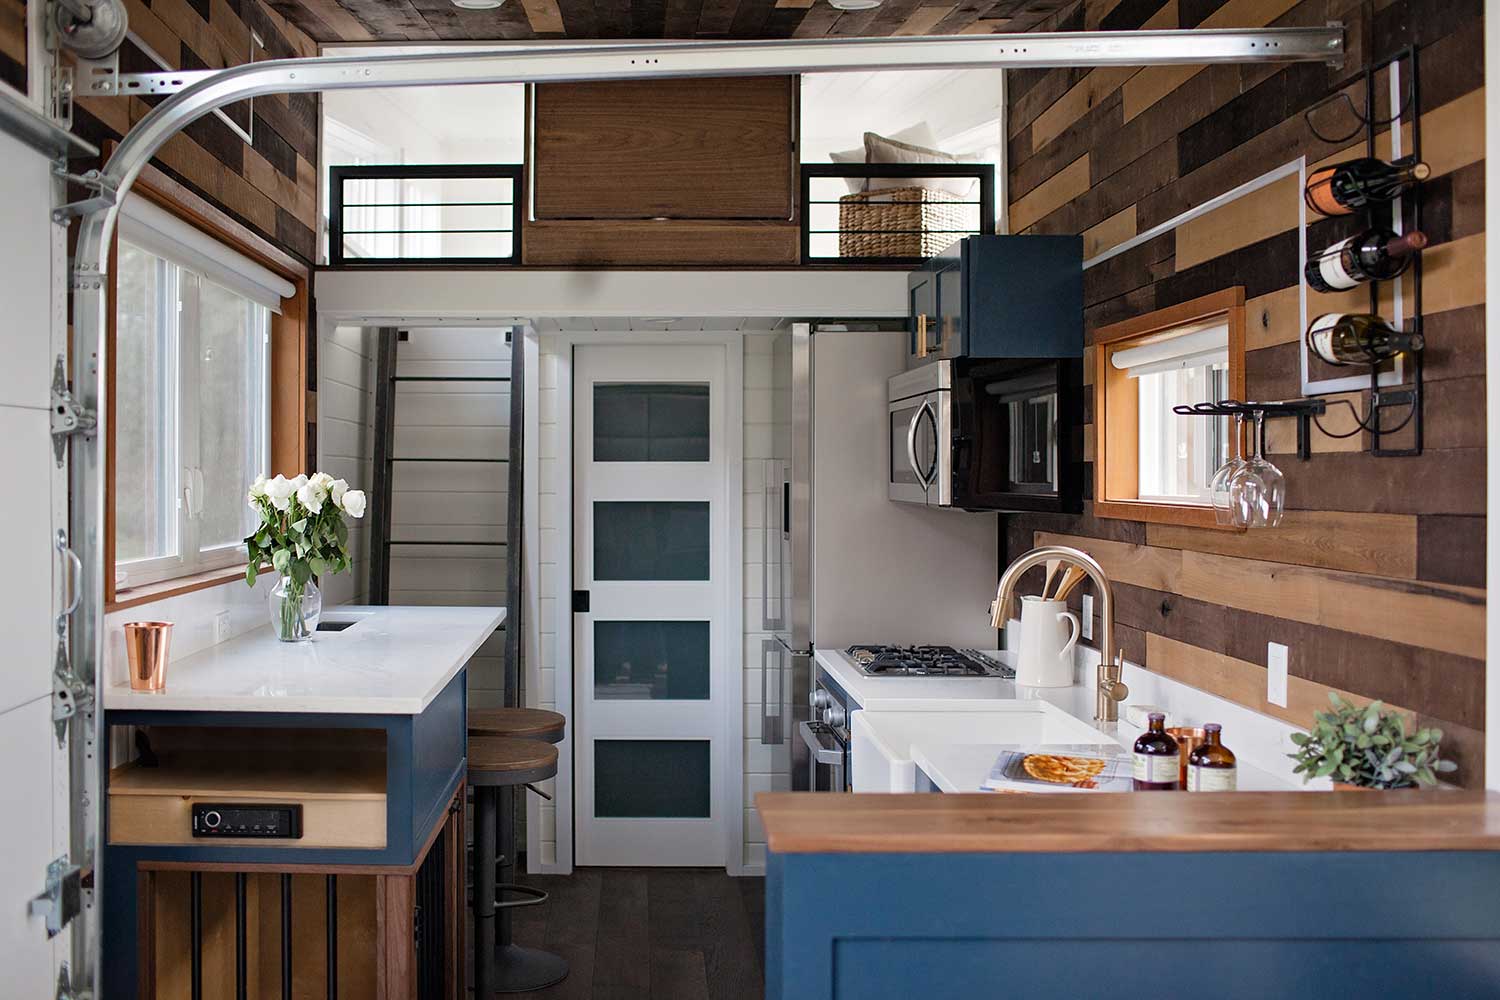 Interior of a tiny home showing garage doors kitchen and loft